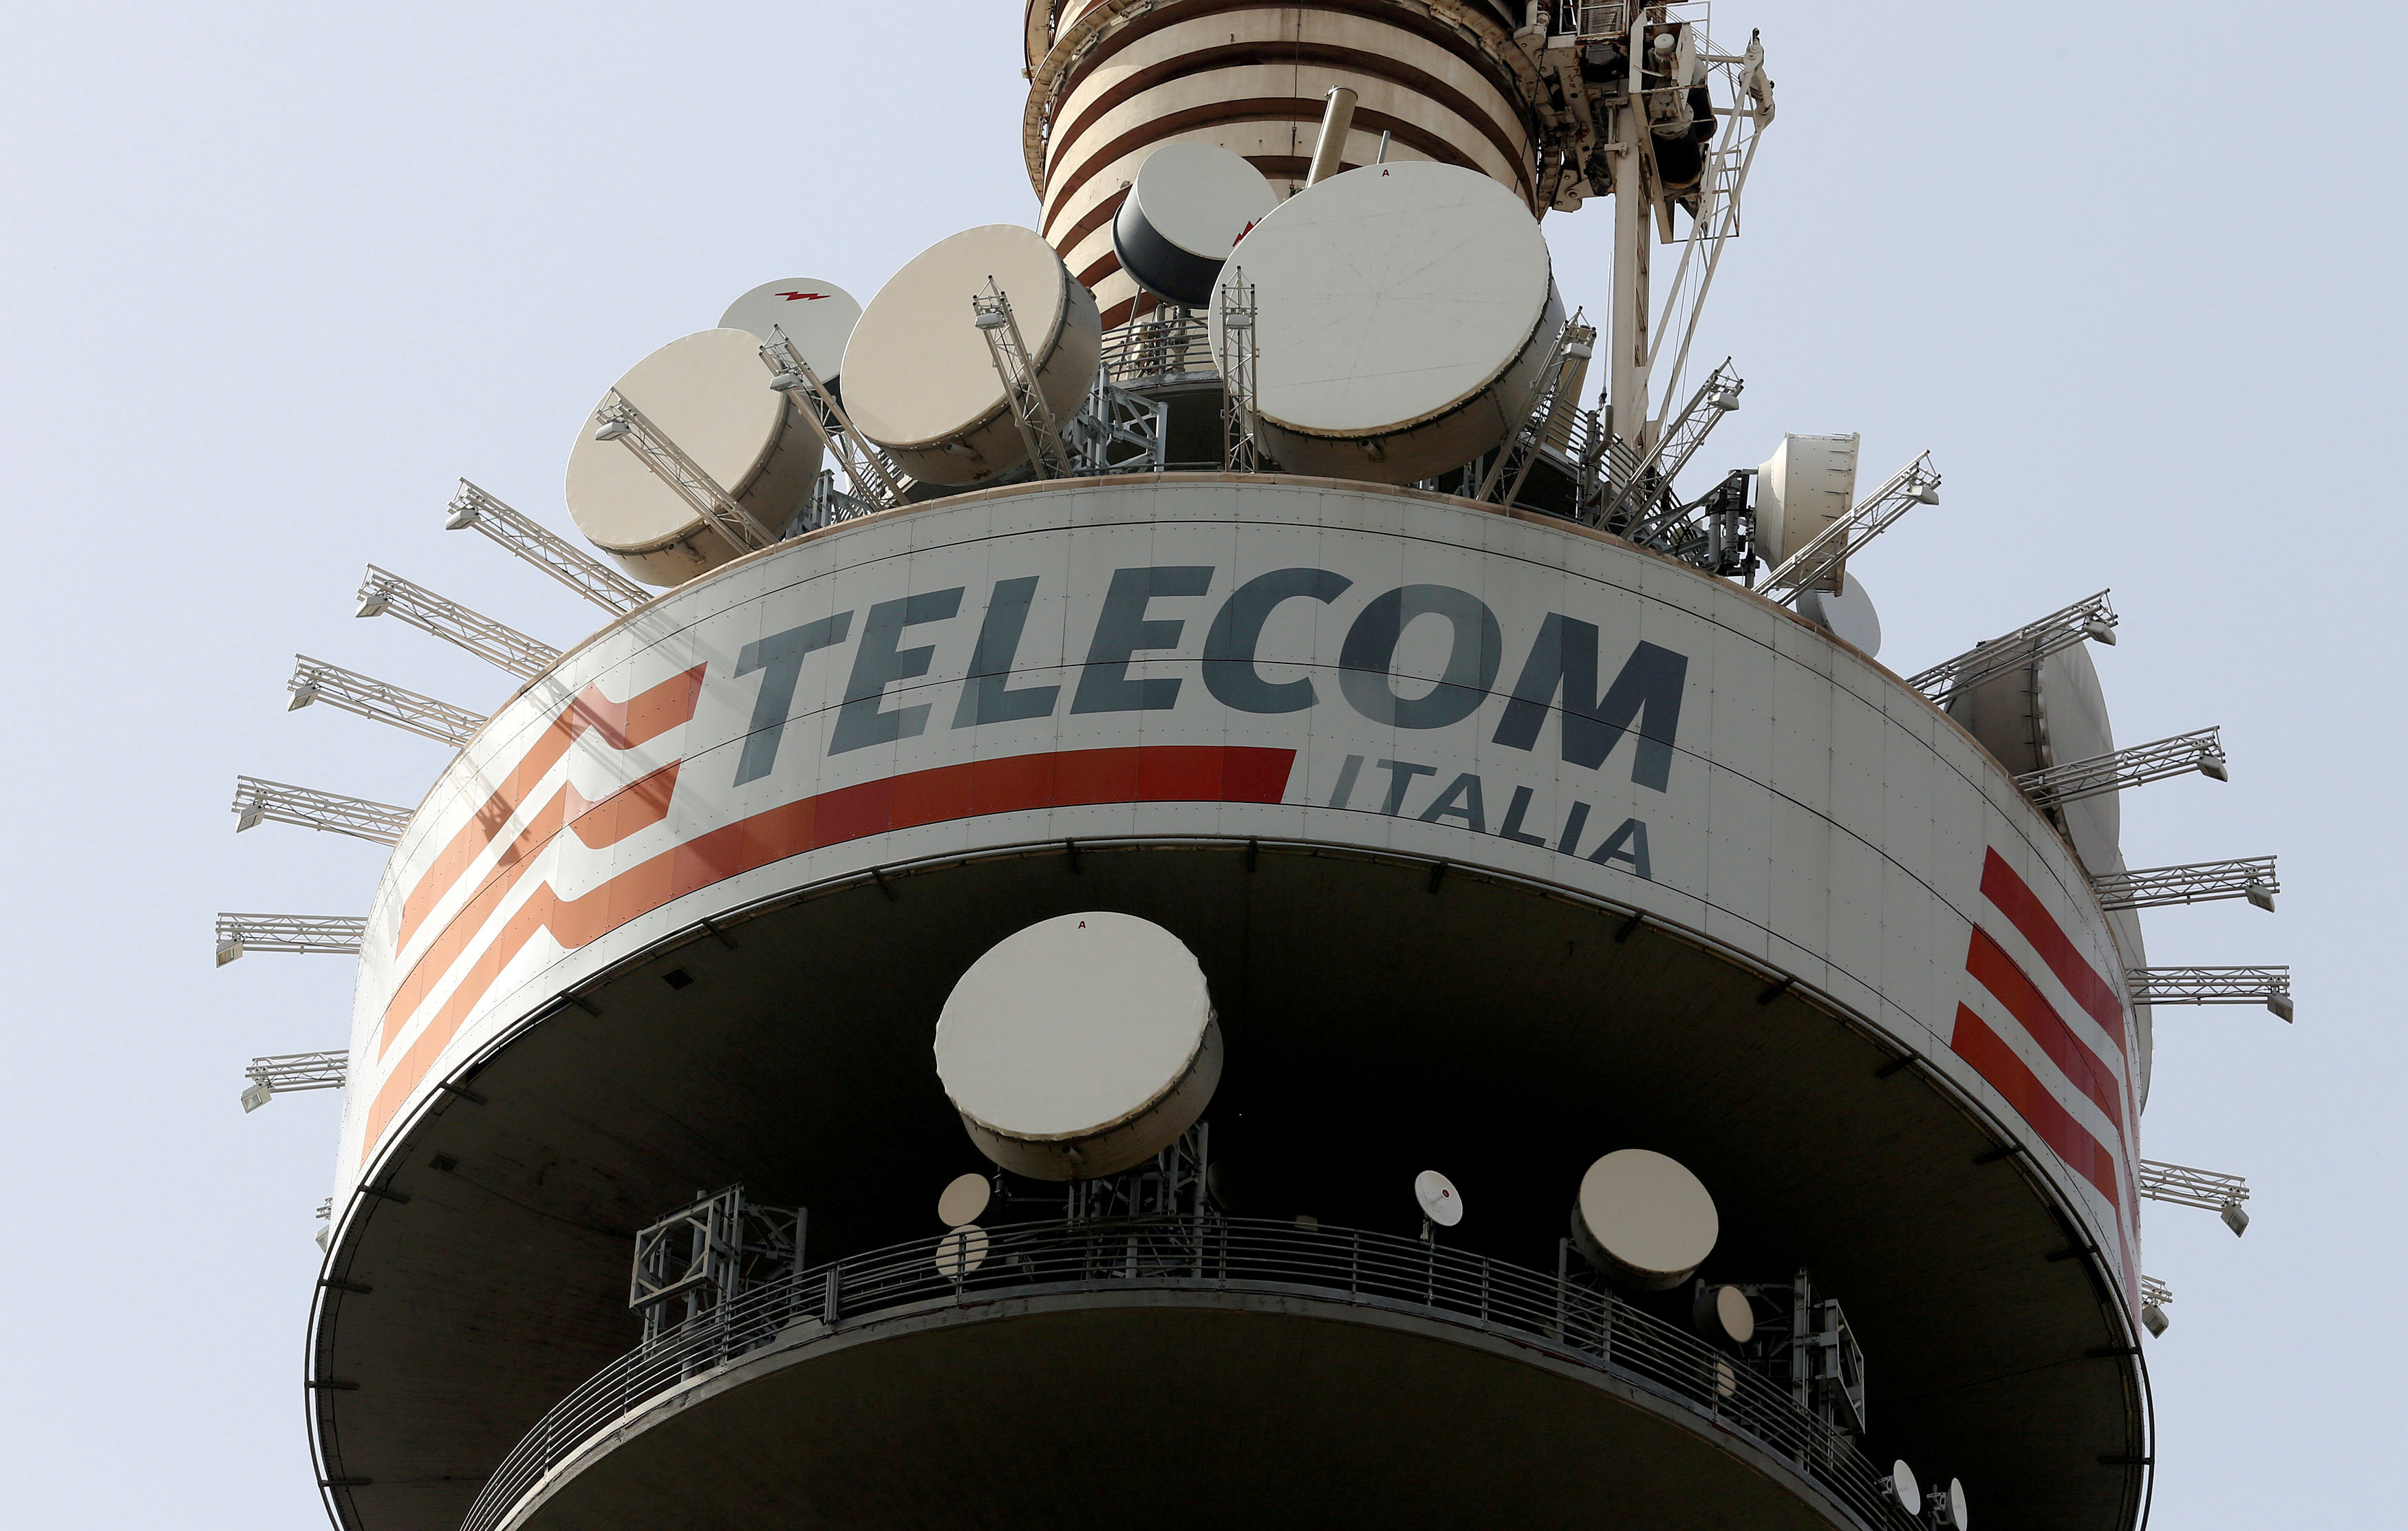 The US financial investor KKR is considering the takeover of Telecom Italia